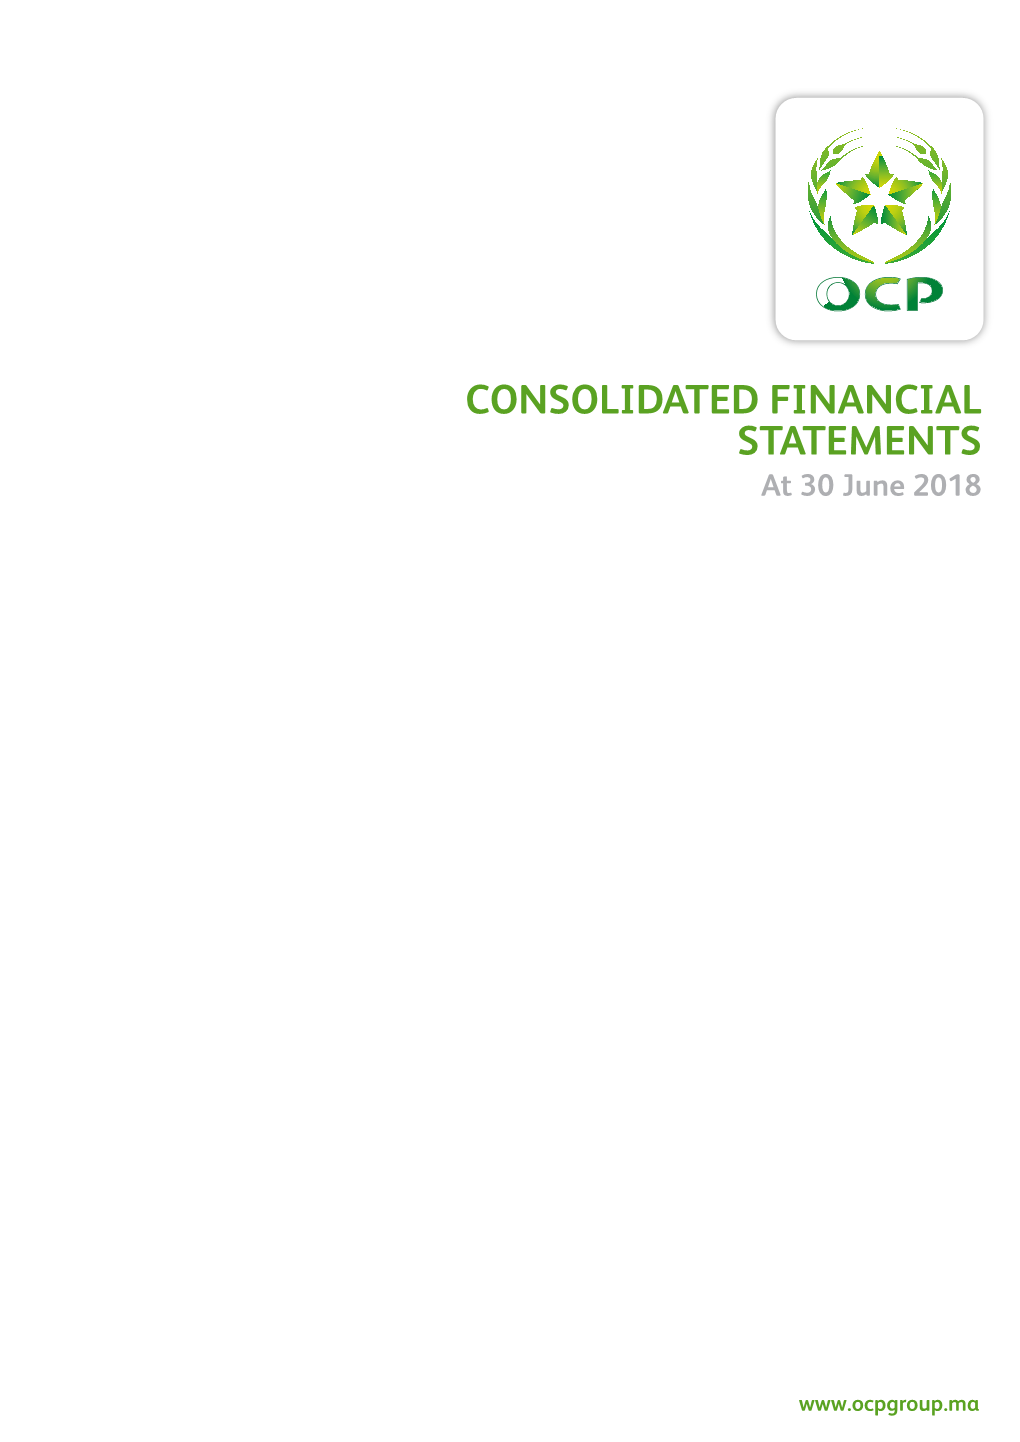 CONSOLIDATED FINANCIAL STATEMENTS at 30 June 2018